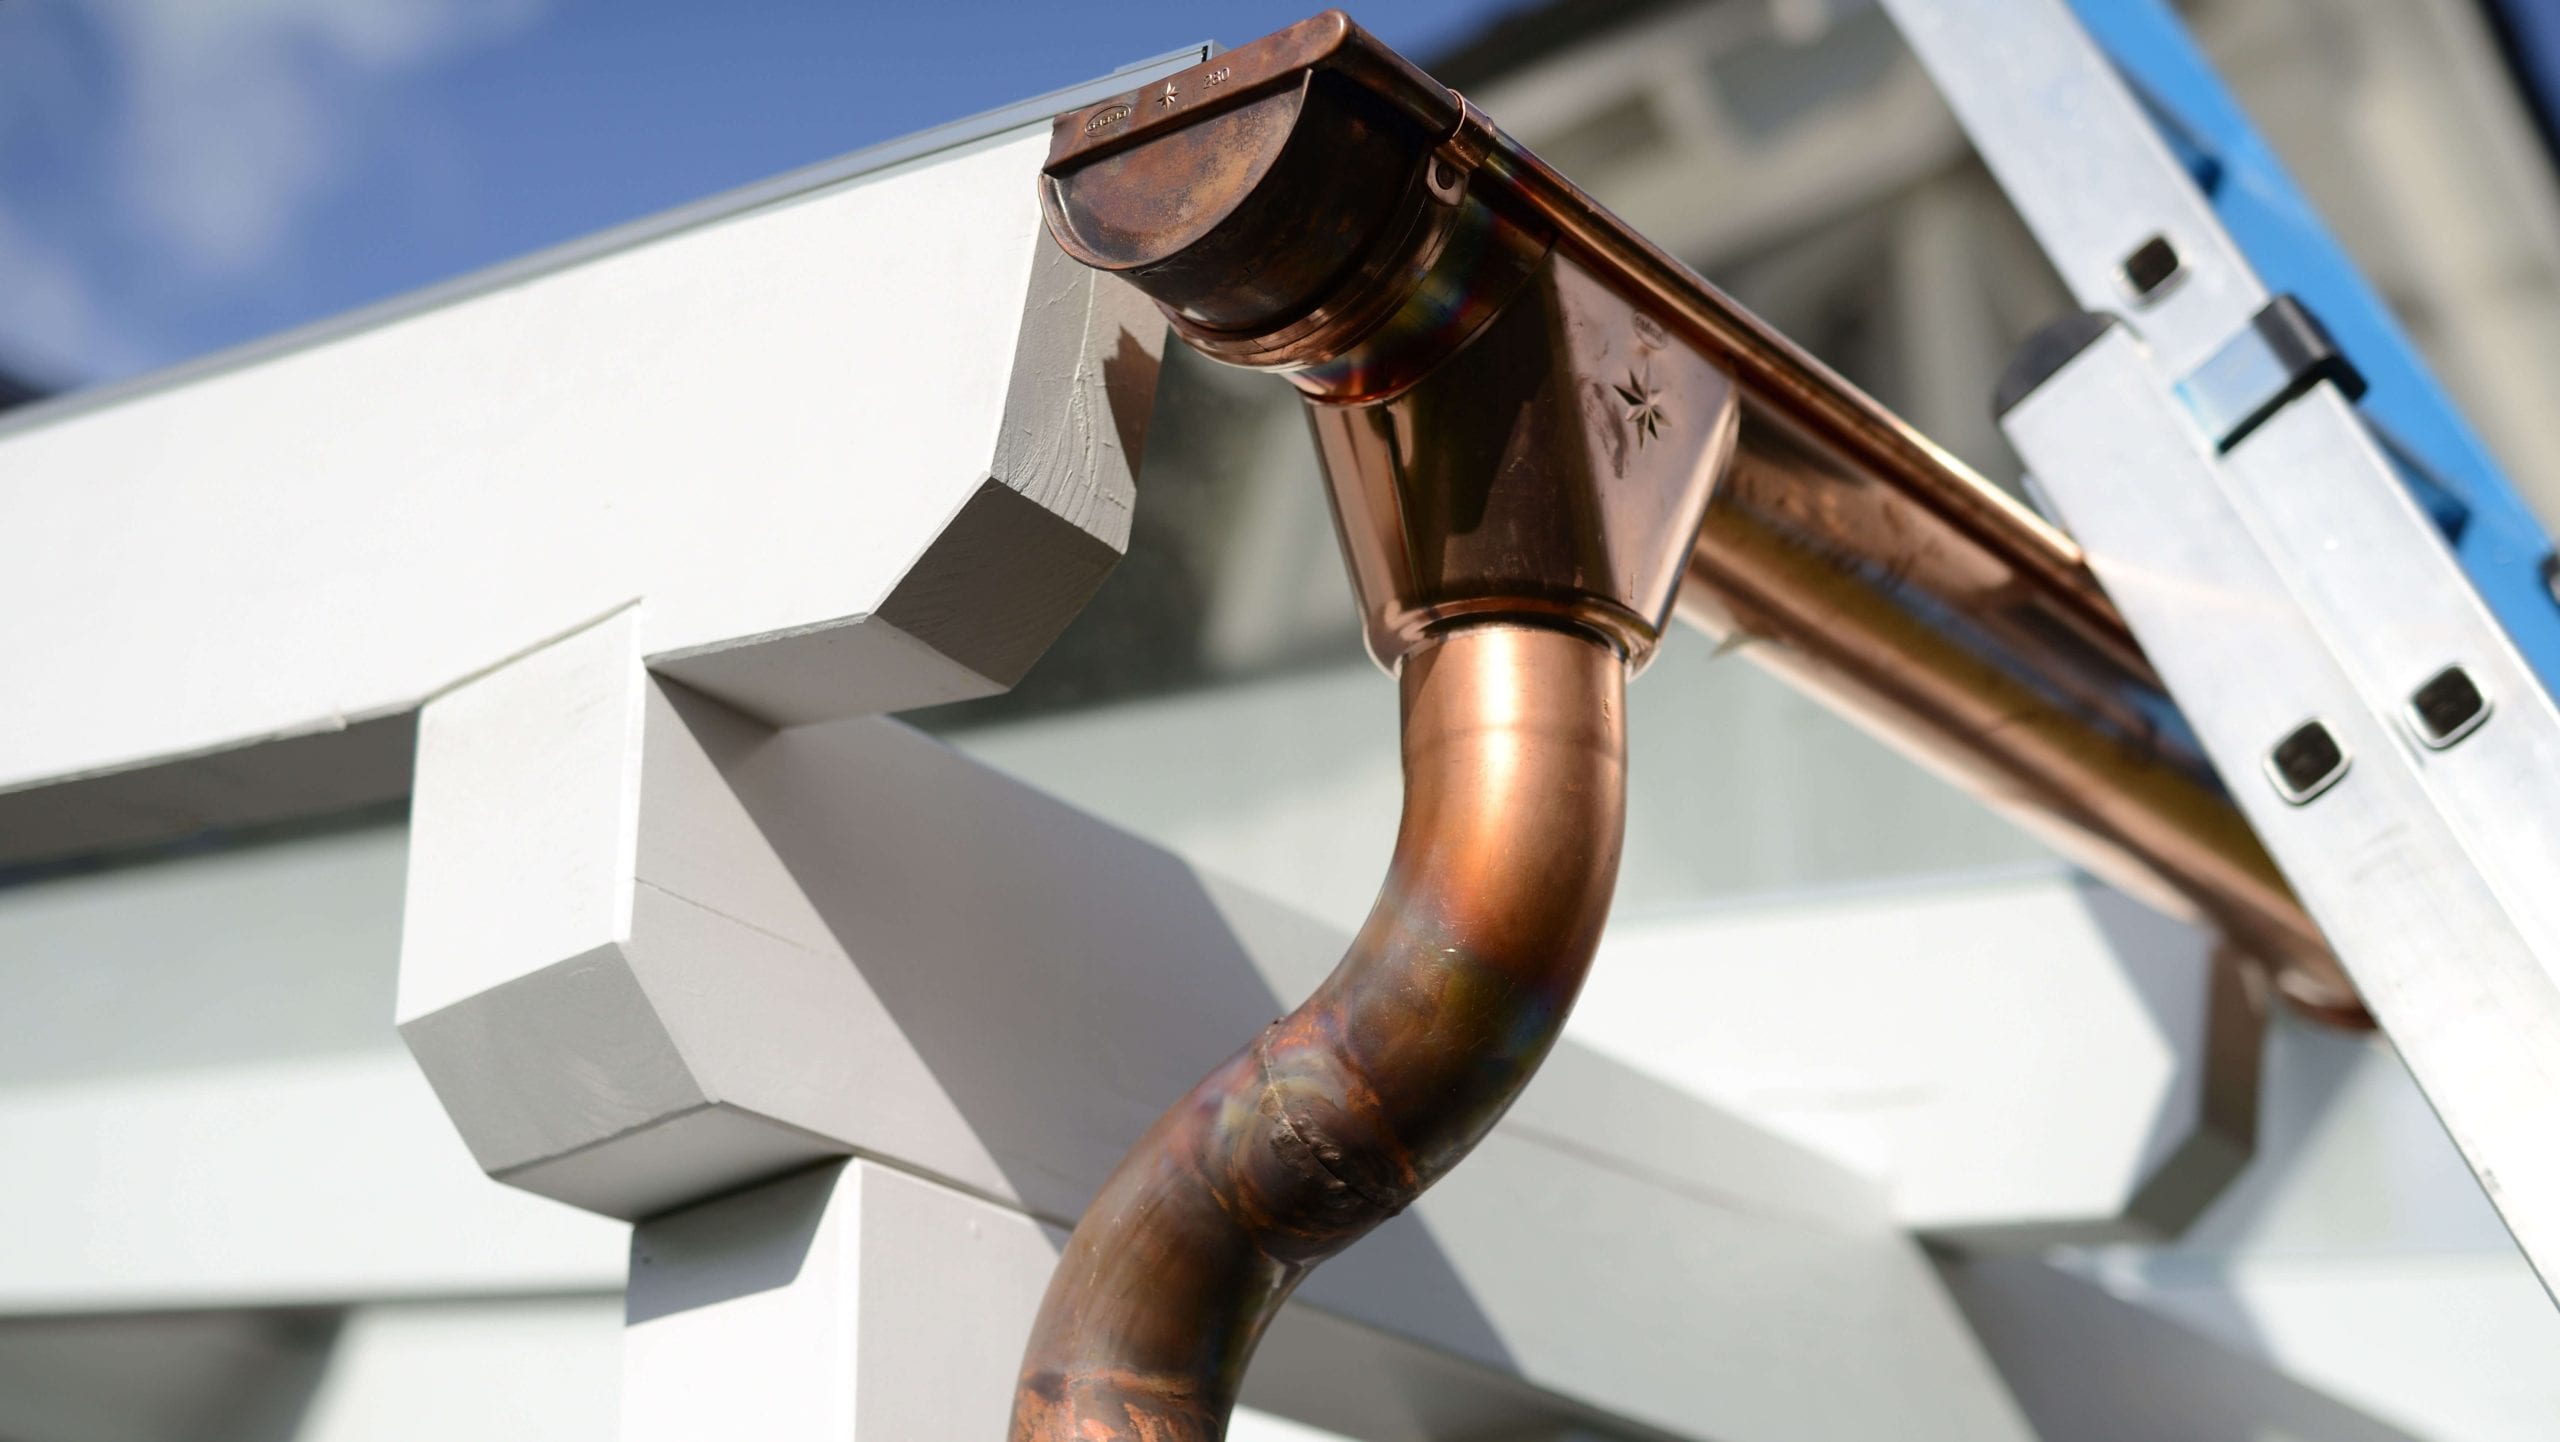 Make your property stand out with copper gutters. Contact for gutter installation in Raleigh